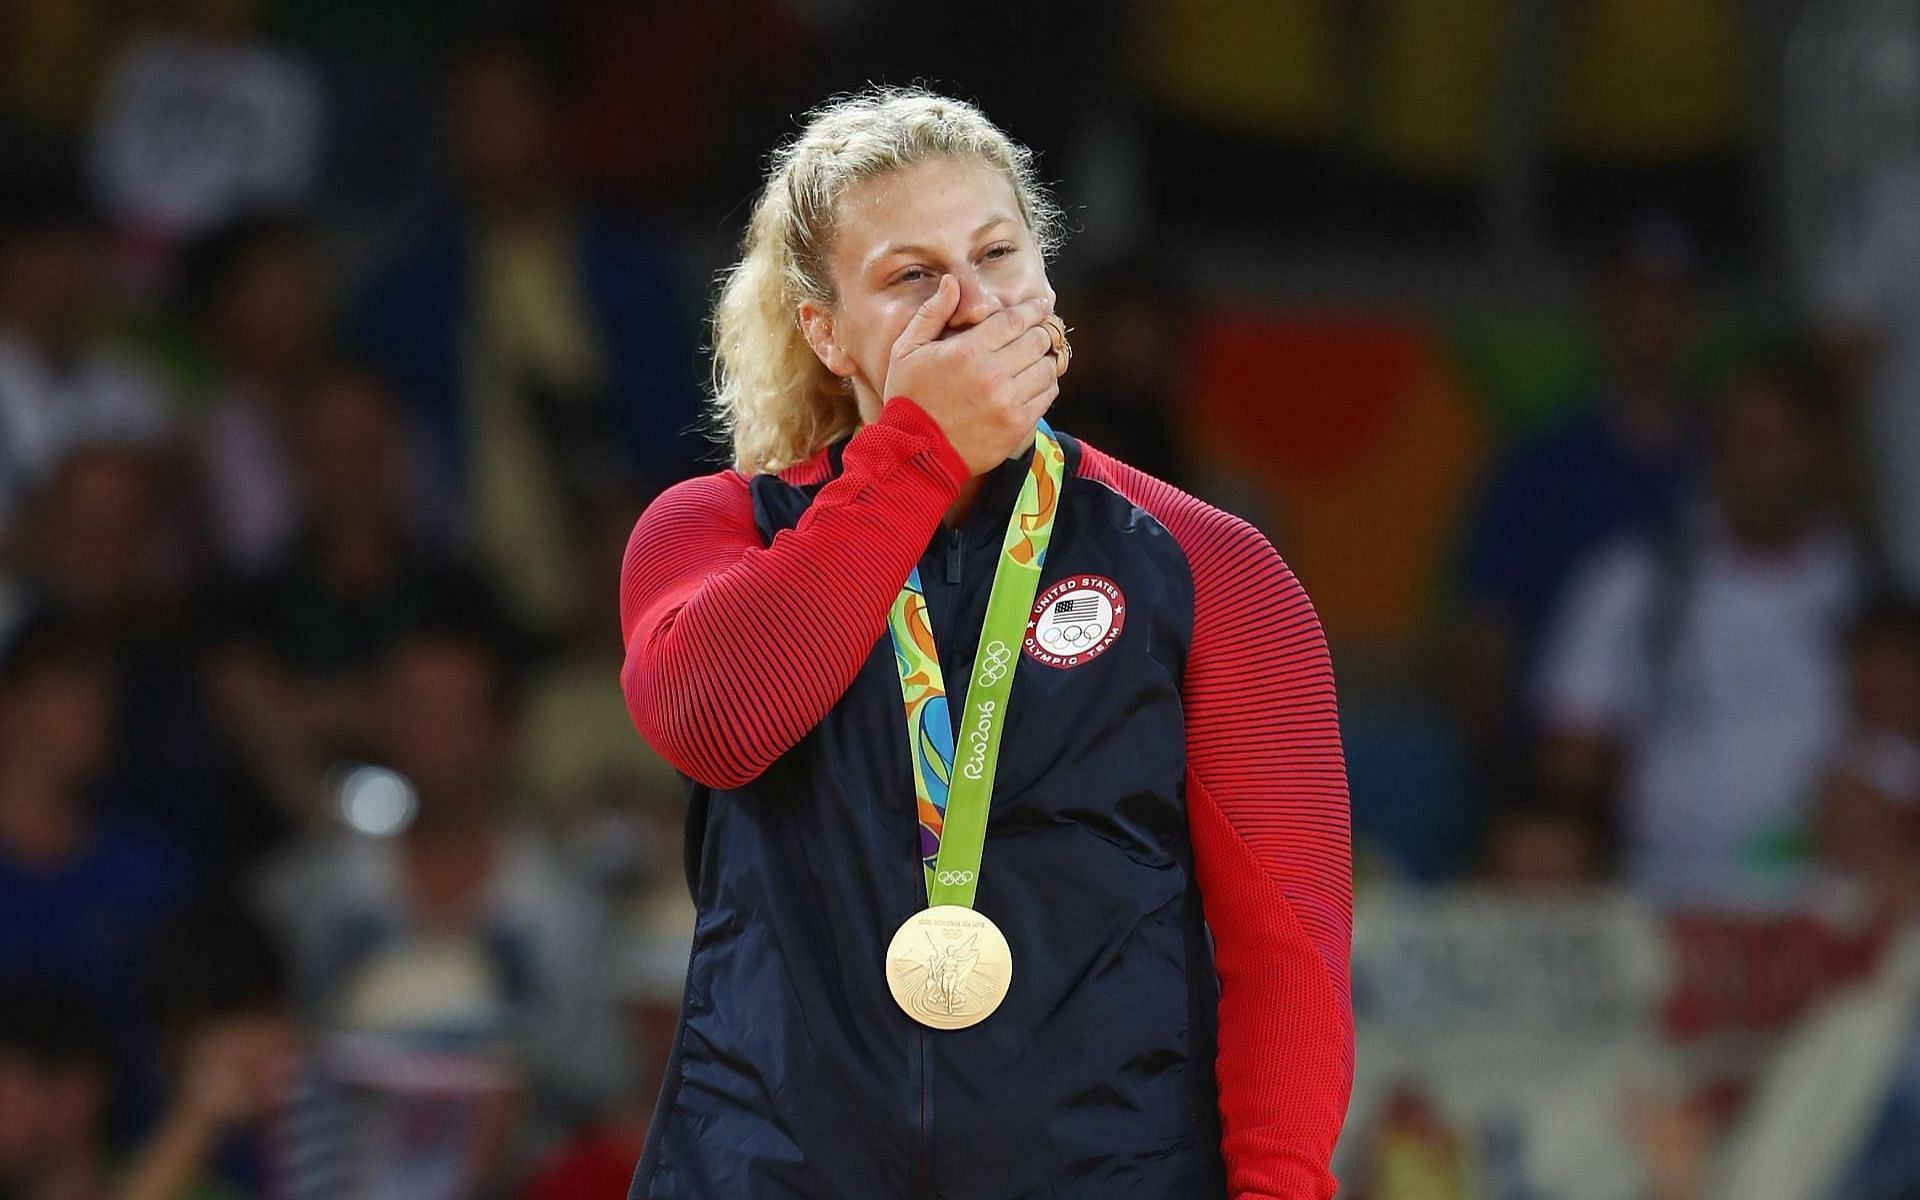 Kayla Harrison talks about what her future holds in mixed martial arts